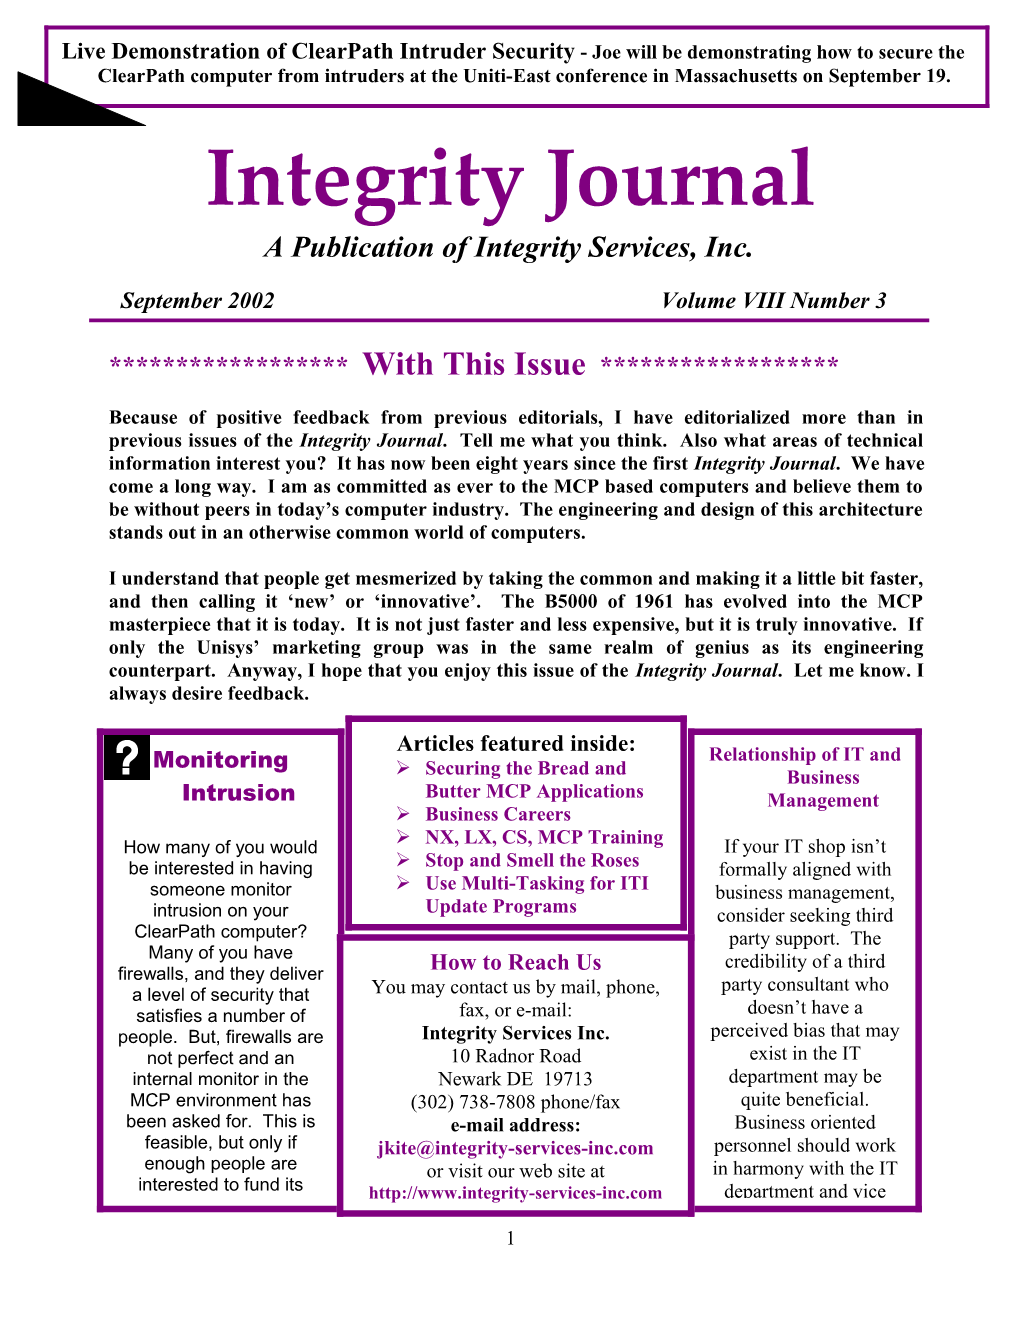 A Publication of Integrity Services, Inc